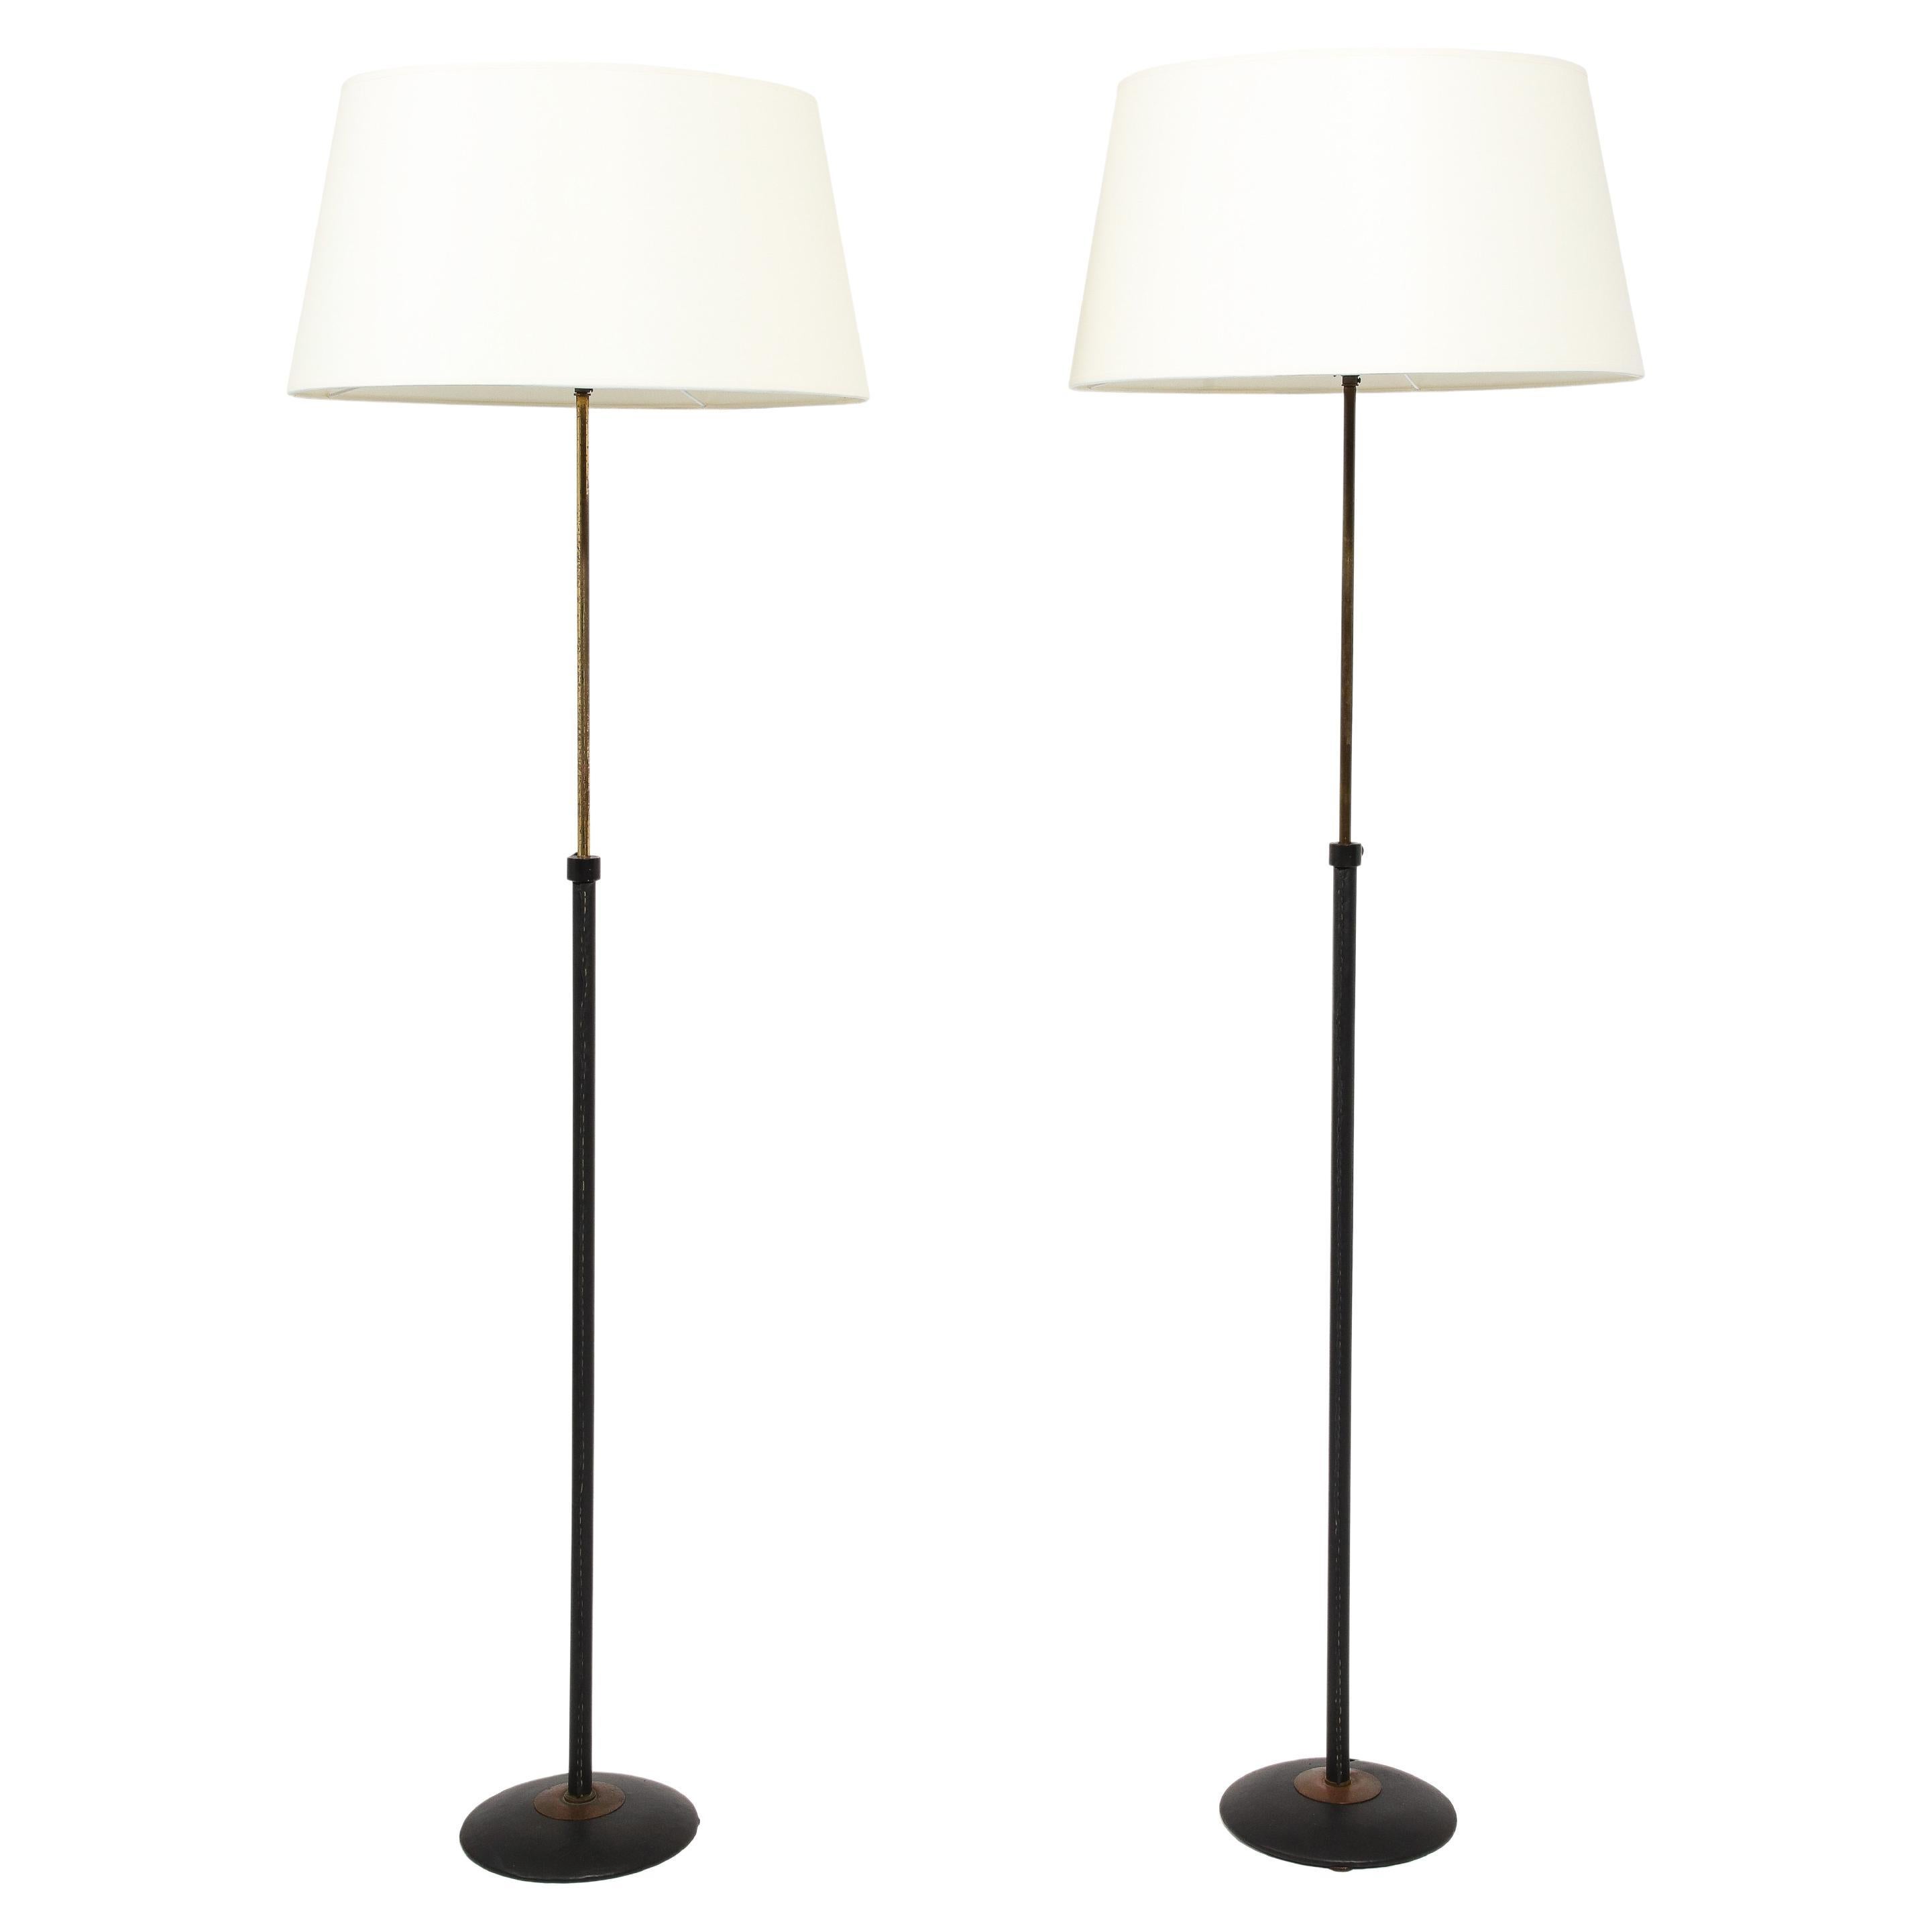 Adnet Style Brass & Black Leather Wrapped Adjustable Floor Lamps, France 1960's For Sale